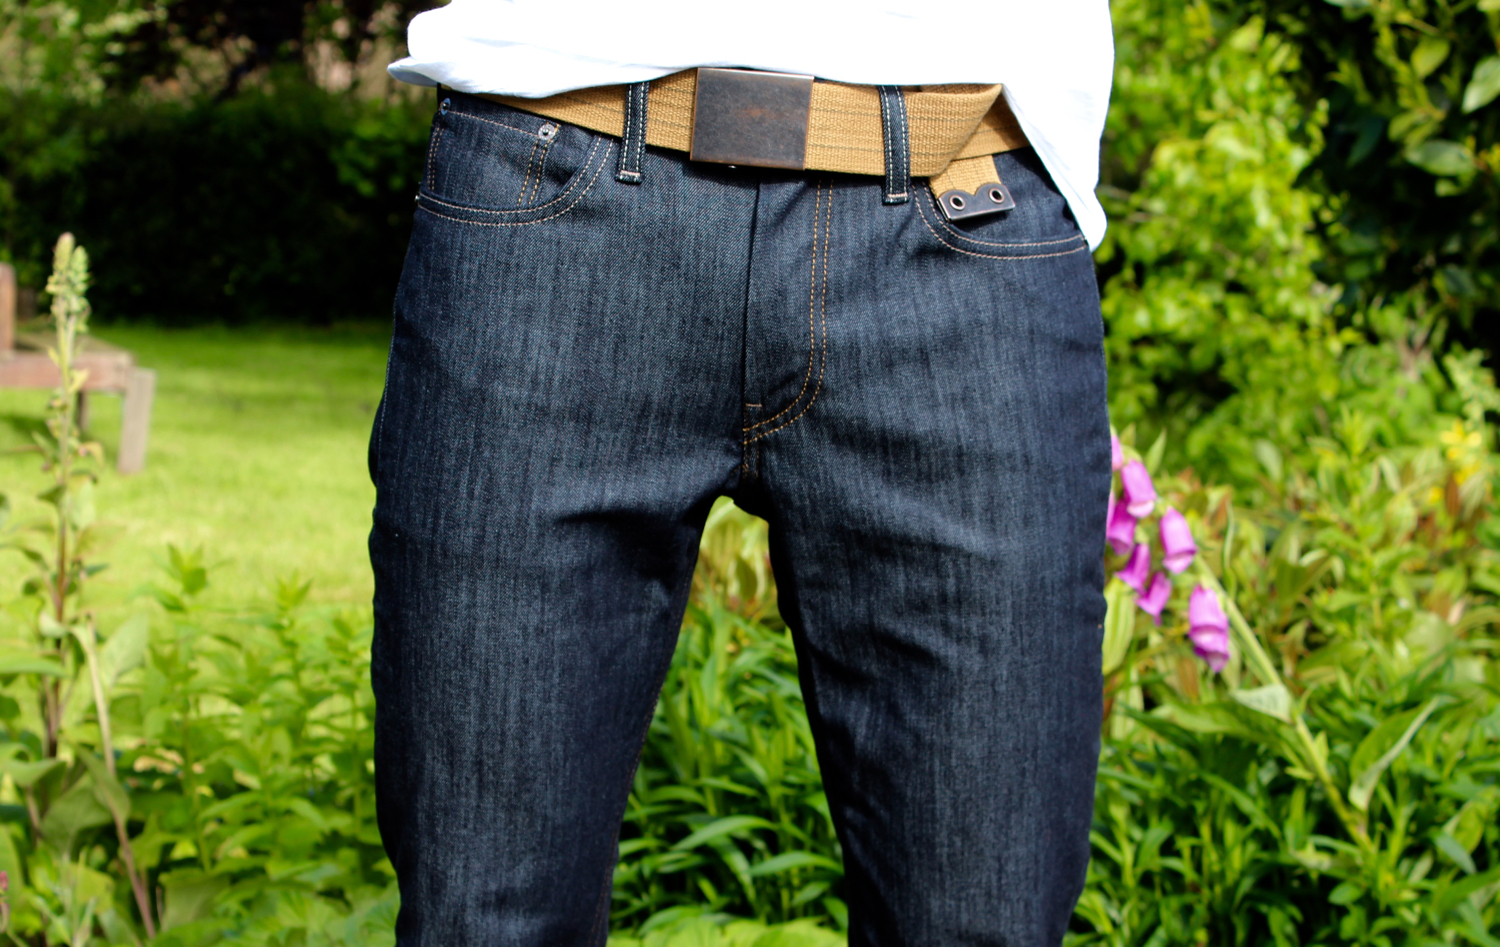 Review: Levi's 511 Slim Fit Commuter Jeans And Tee | peacecommission ...